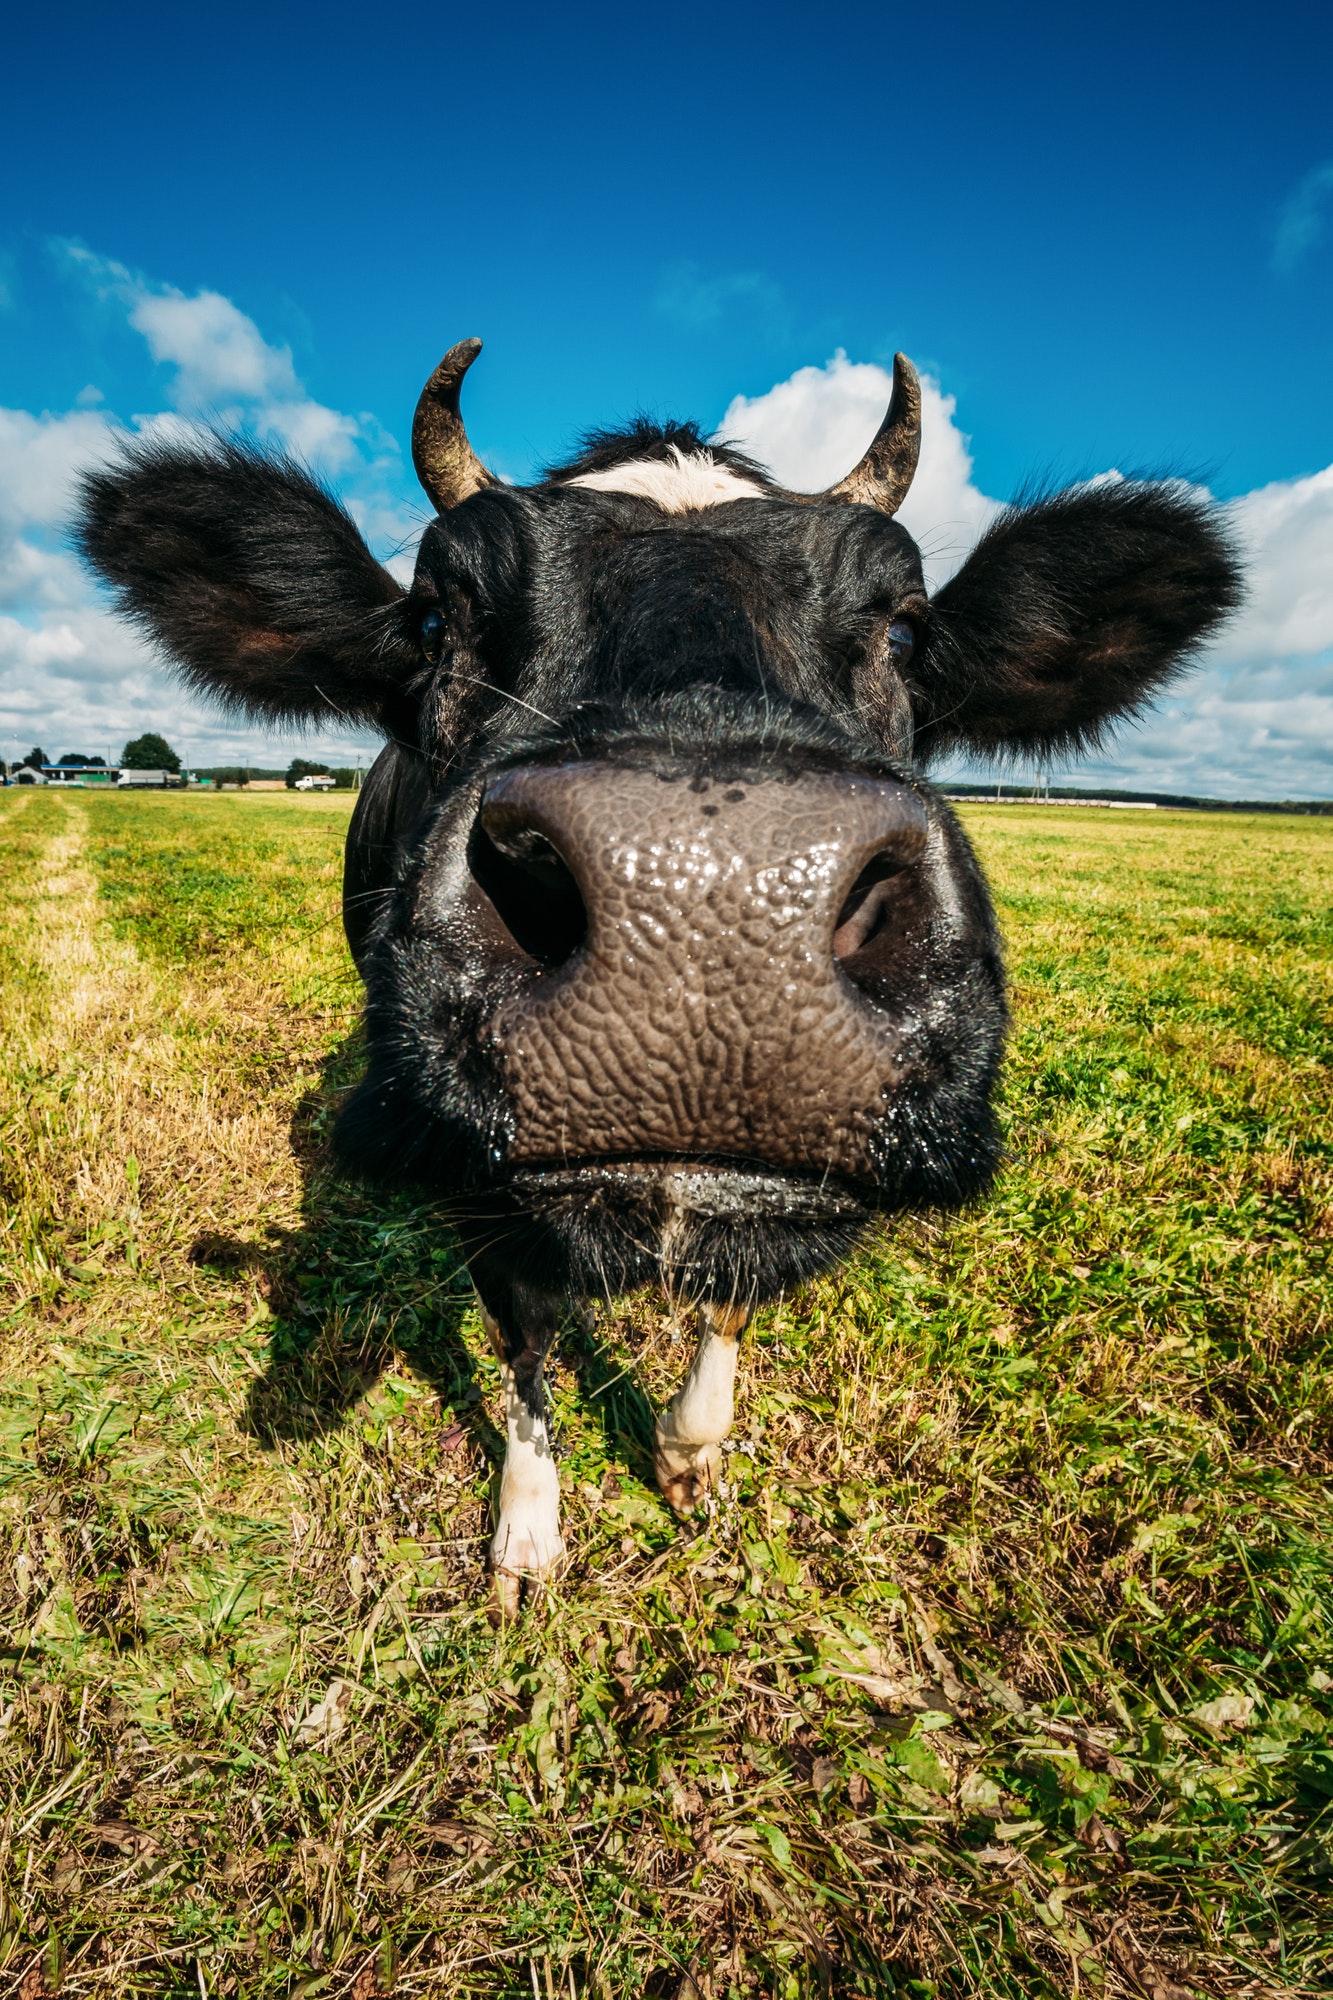 Close Up Of Cow In Meadow Or Field With Green Grass In Mouth. Co